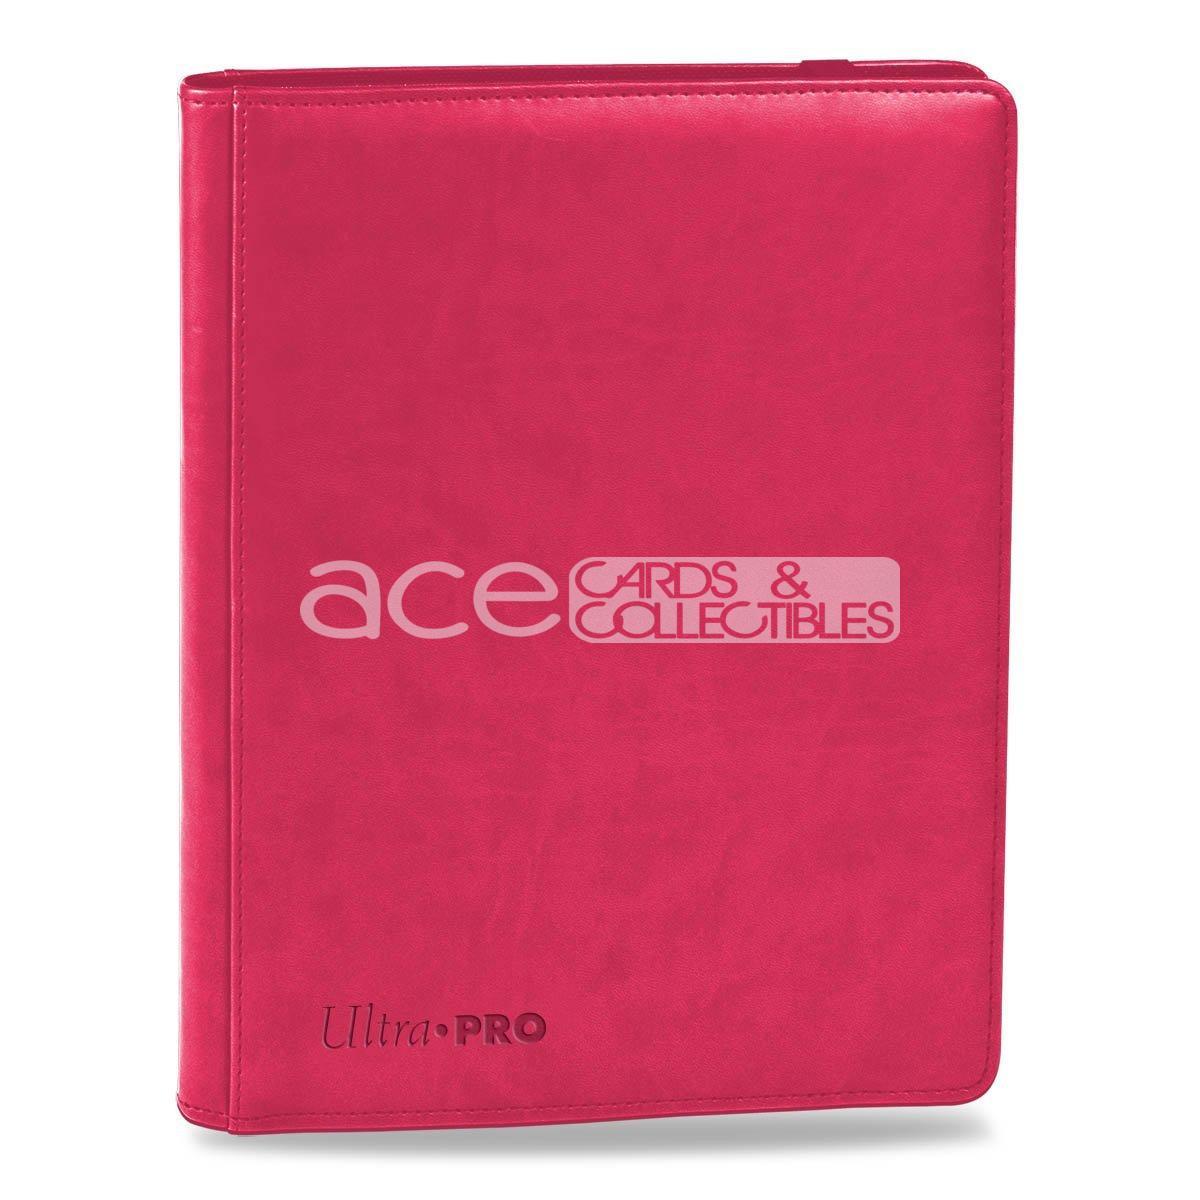 Ultra PRO Album Premium PRO-Binder 9-pocket-Bright Pink-Ultra PRO-Ace Cards &amp; Collectibles